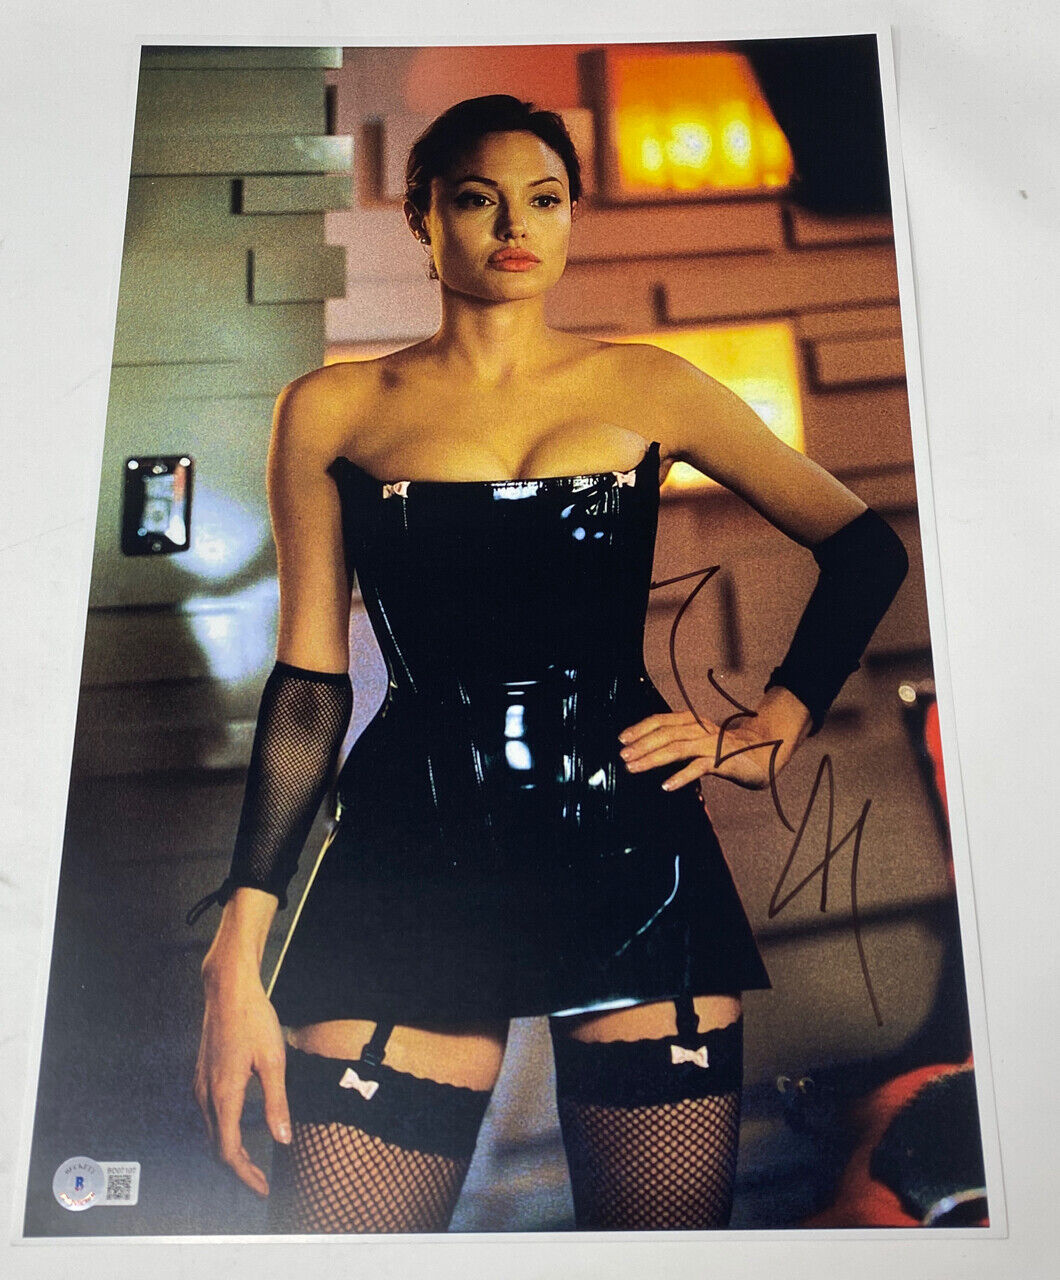 Angelina Jolie Signed Autographed 12x18 Photo Poster painting Poster Mr & Mrs Smith Beckett COA